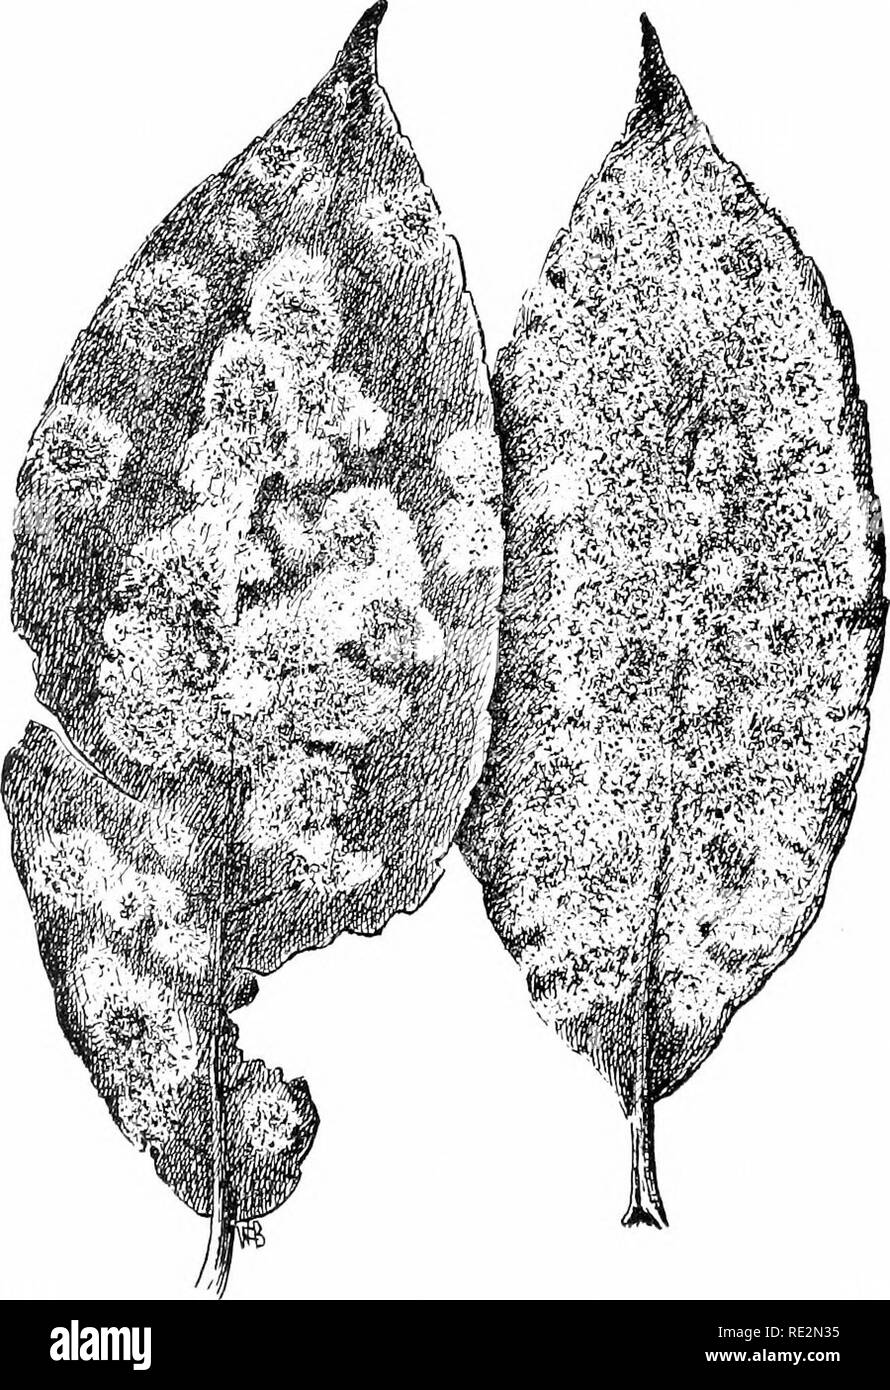 . Elementary botany. Botany. 196 MORPHOLOGY. 414. Asci and ascospores.—While we are looking at a few of these through the mirrosrnpe with the low power, we should. Fig. 325- Leaves of willtiw showing wilinw mildew. Tlie black dots are the fruit bodies iperitlnecia) seated on tlie wliite inxeliuin, [iress on the cover glass with a needle until we see a few of the perithelia nipturc. If this is done larefully we see seeral small owate sacs issue, each containint; a number of spores, a.-- shown 111 fig. 227. Such a sac is au cisc/is, and the sjjores are ascus/iores.. Please note that these imag Stock Photo